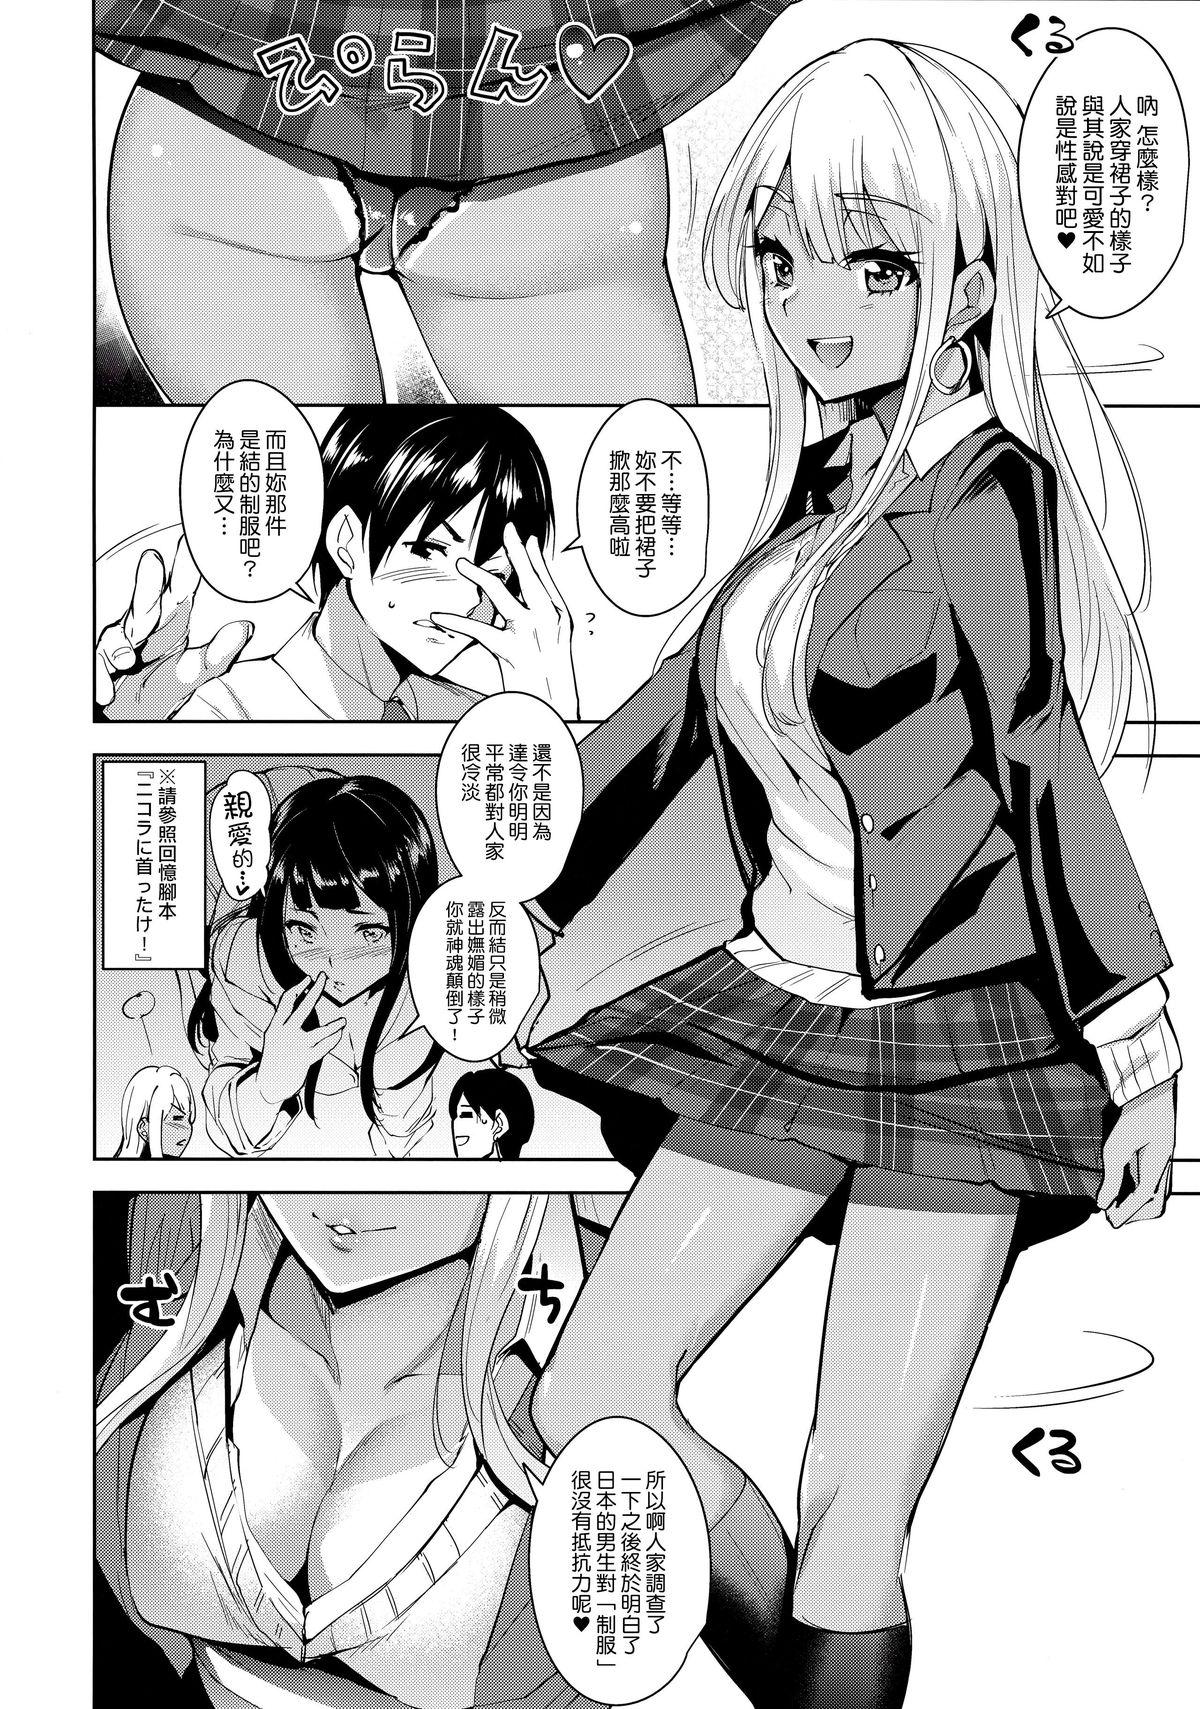 Sologirl 7SU2 - Tokyo 7th sisters Two - Page 6